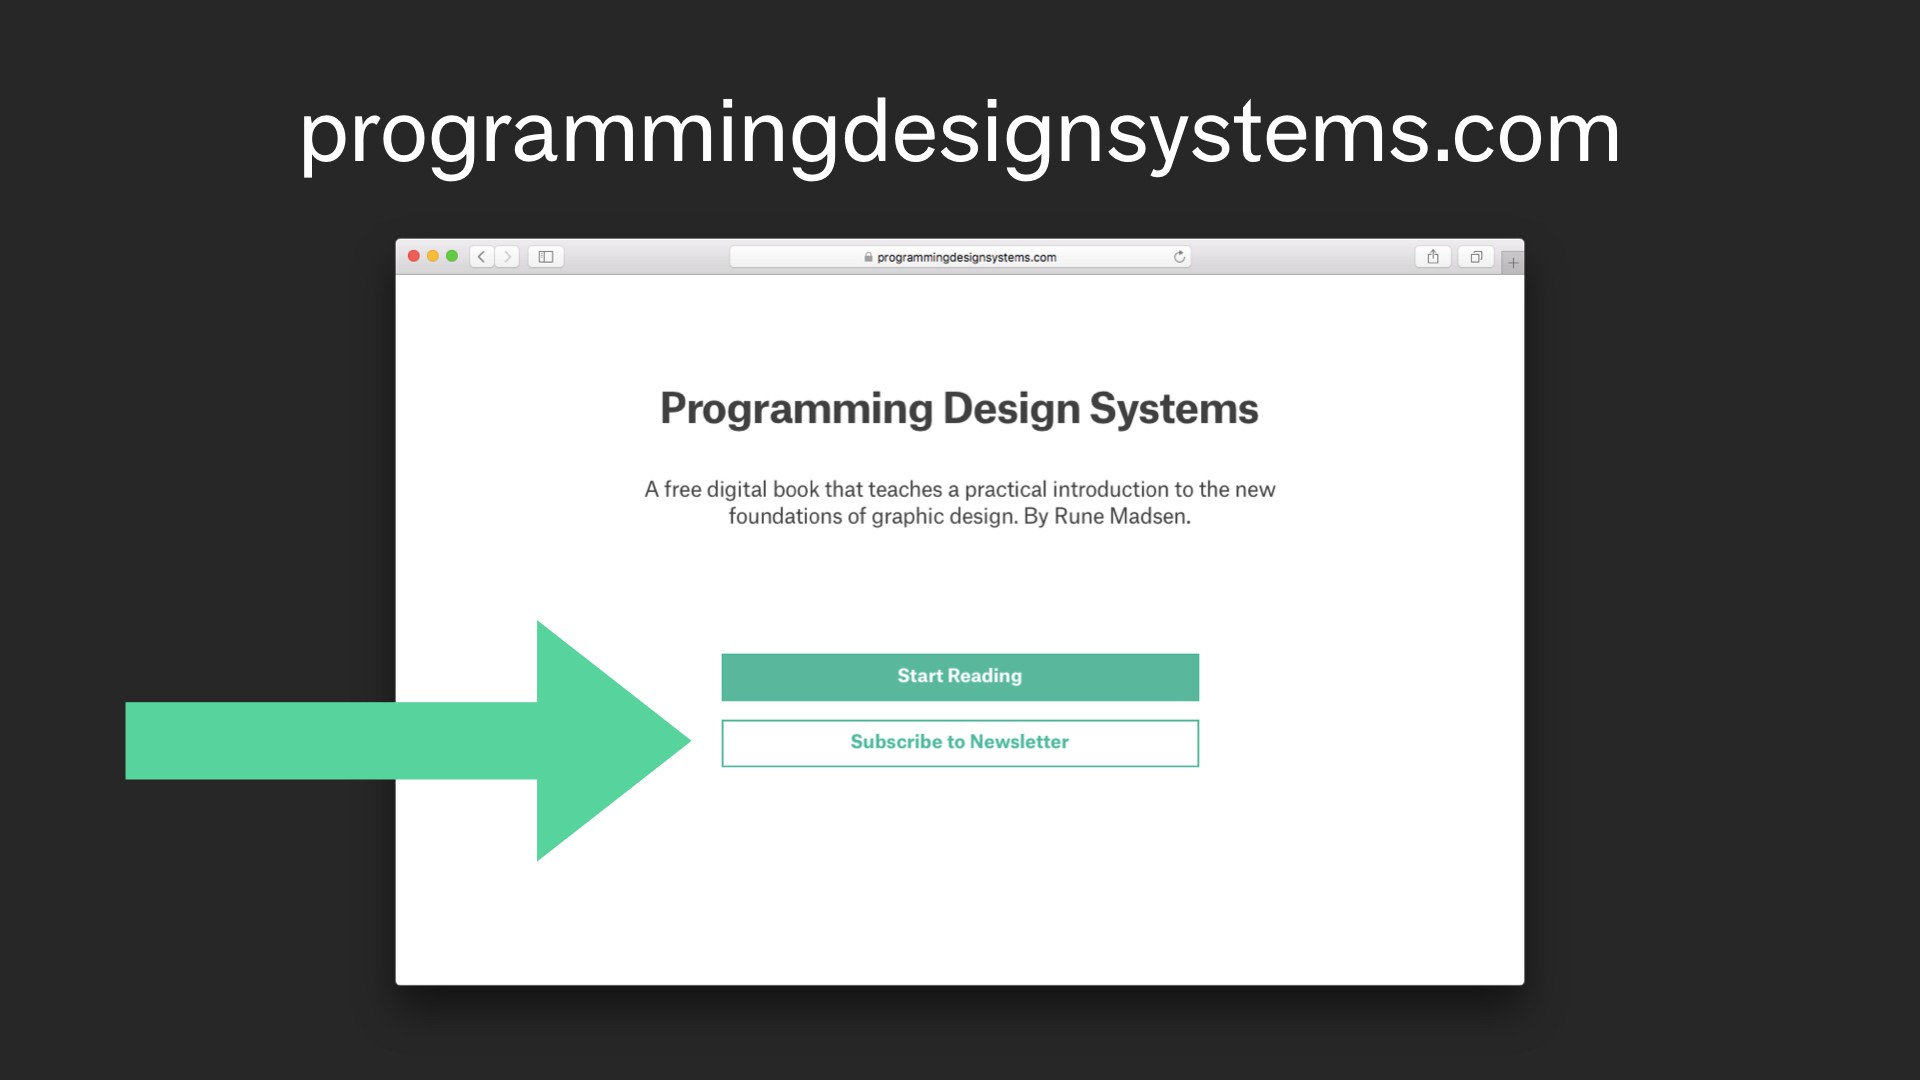 Screenshot of subscribe button in programmingdesignsystems.com.